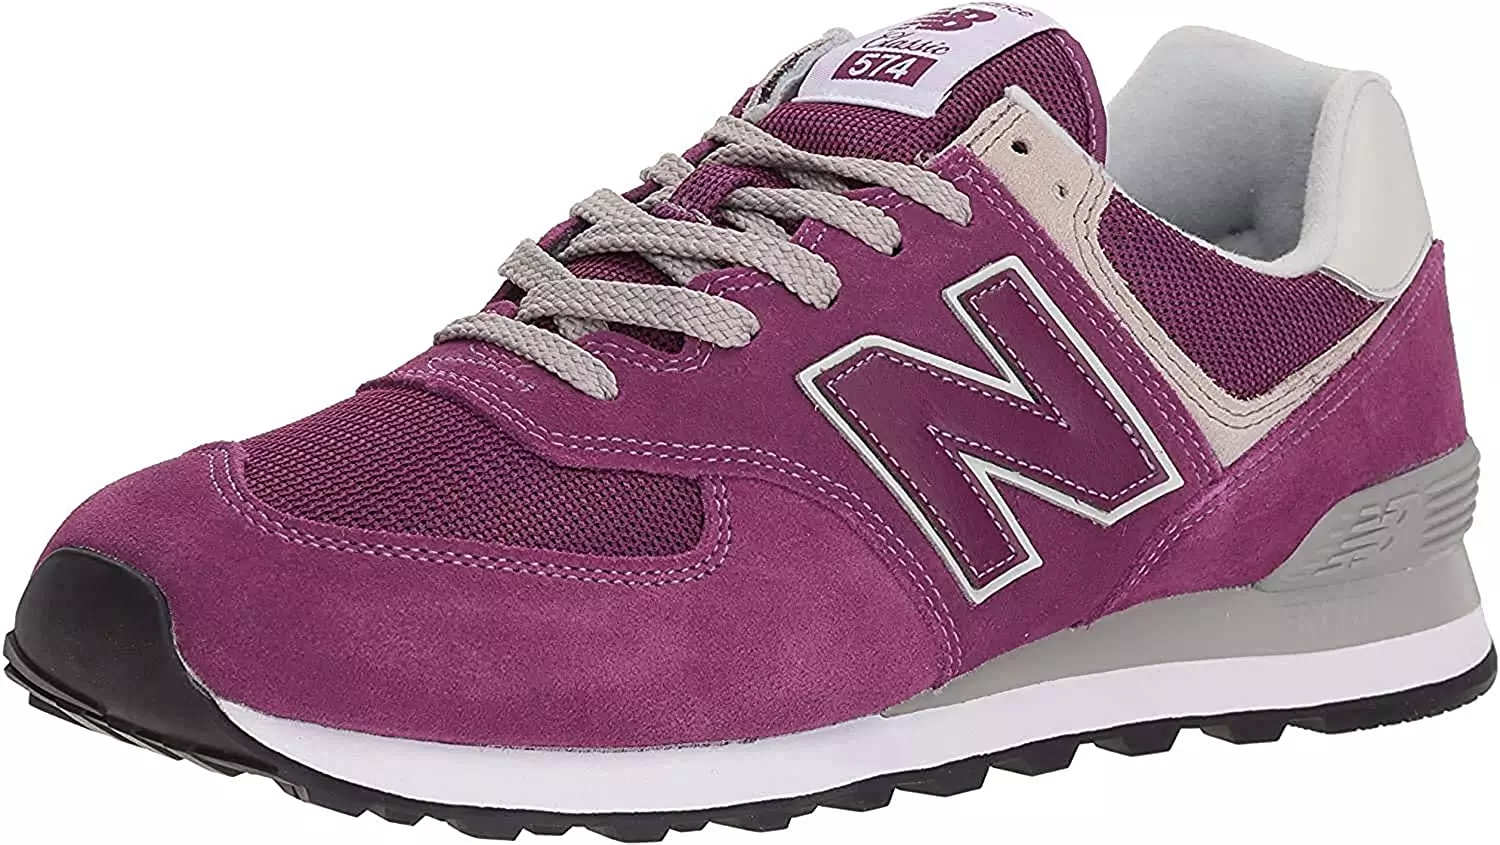 The New Balance Men's 574 V1 Core Sneaker is stylish sneaker that has low ankle support and a colorful designThe New Balance Men's 574 V1 Core Sneaker is stylish sneaker that has low ankle support and a colorful design